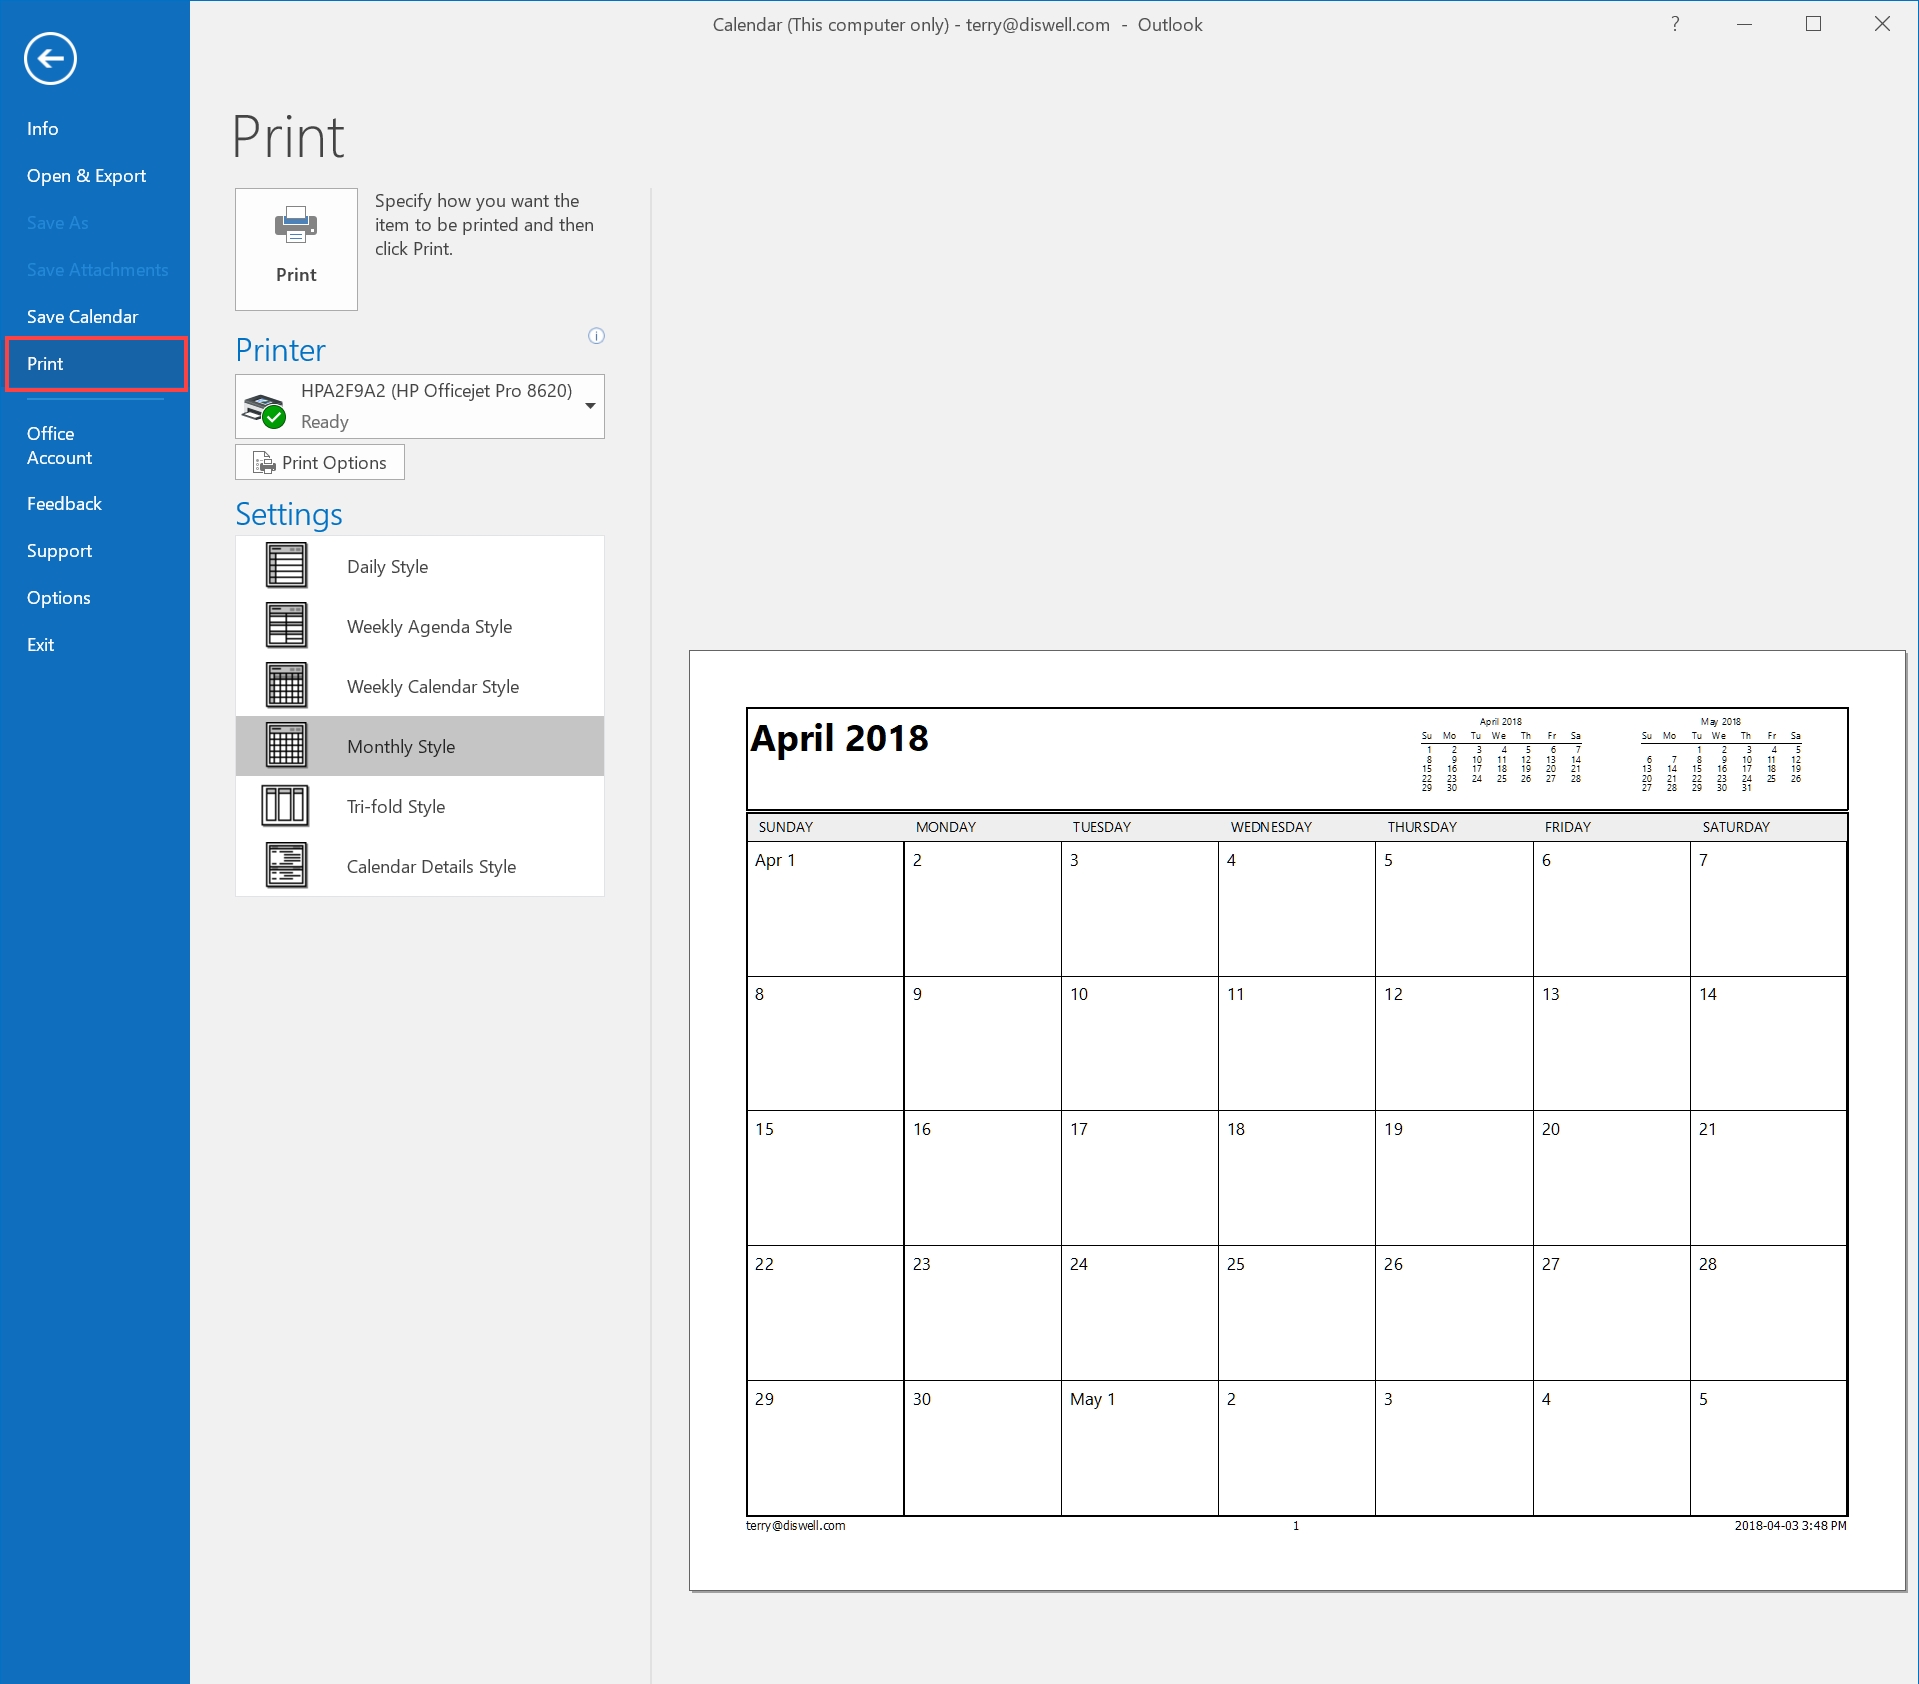 How To Email Or Print Your Calendar In Outlook 2016 - Hostpapa Printing Group Calendar Outlook